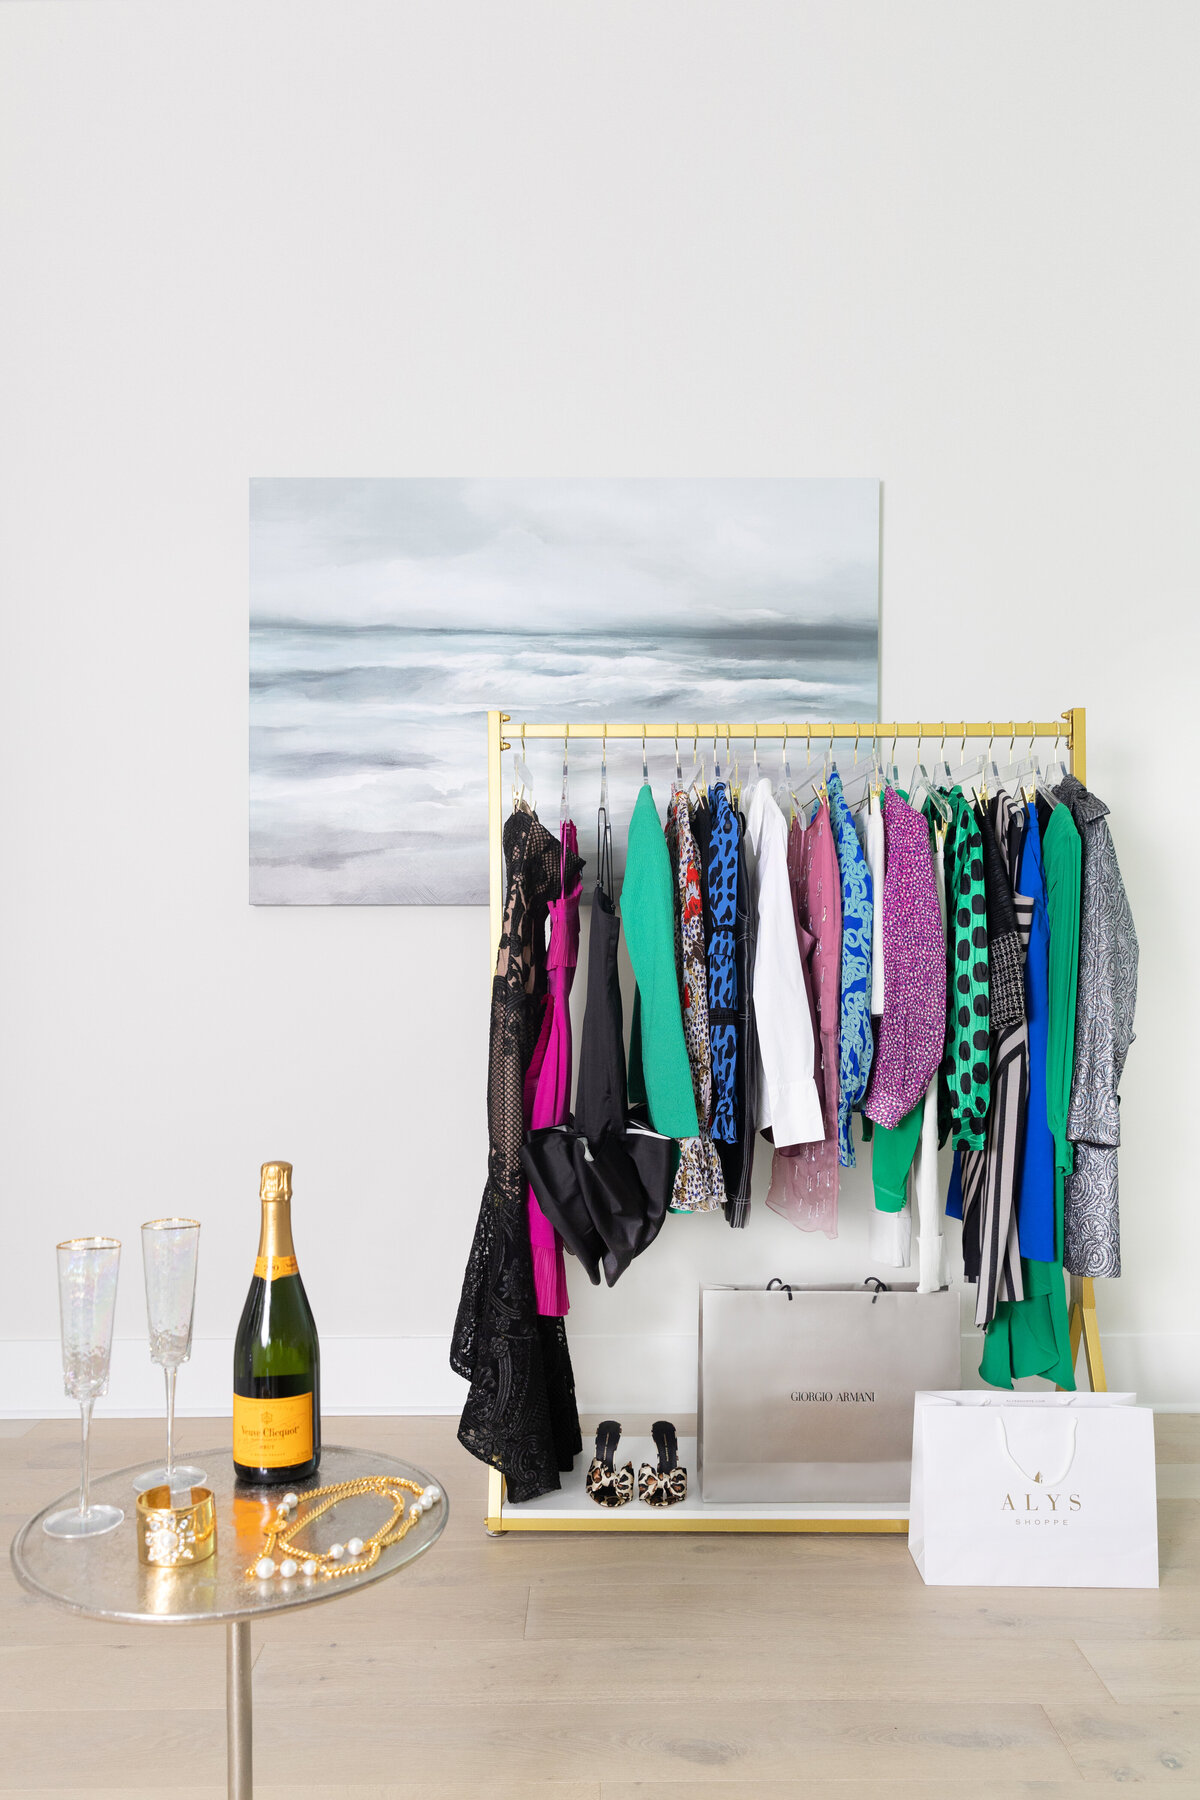 Women's Personal Fitting, clothing rack with shopping bags, Veuve Clicquot